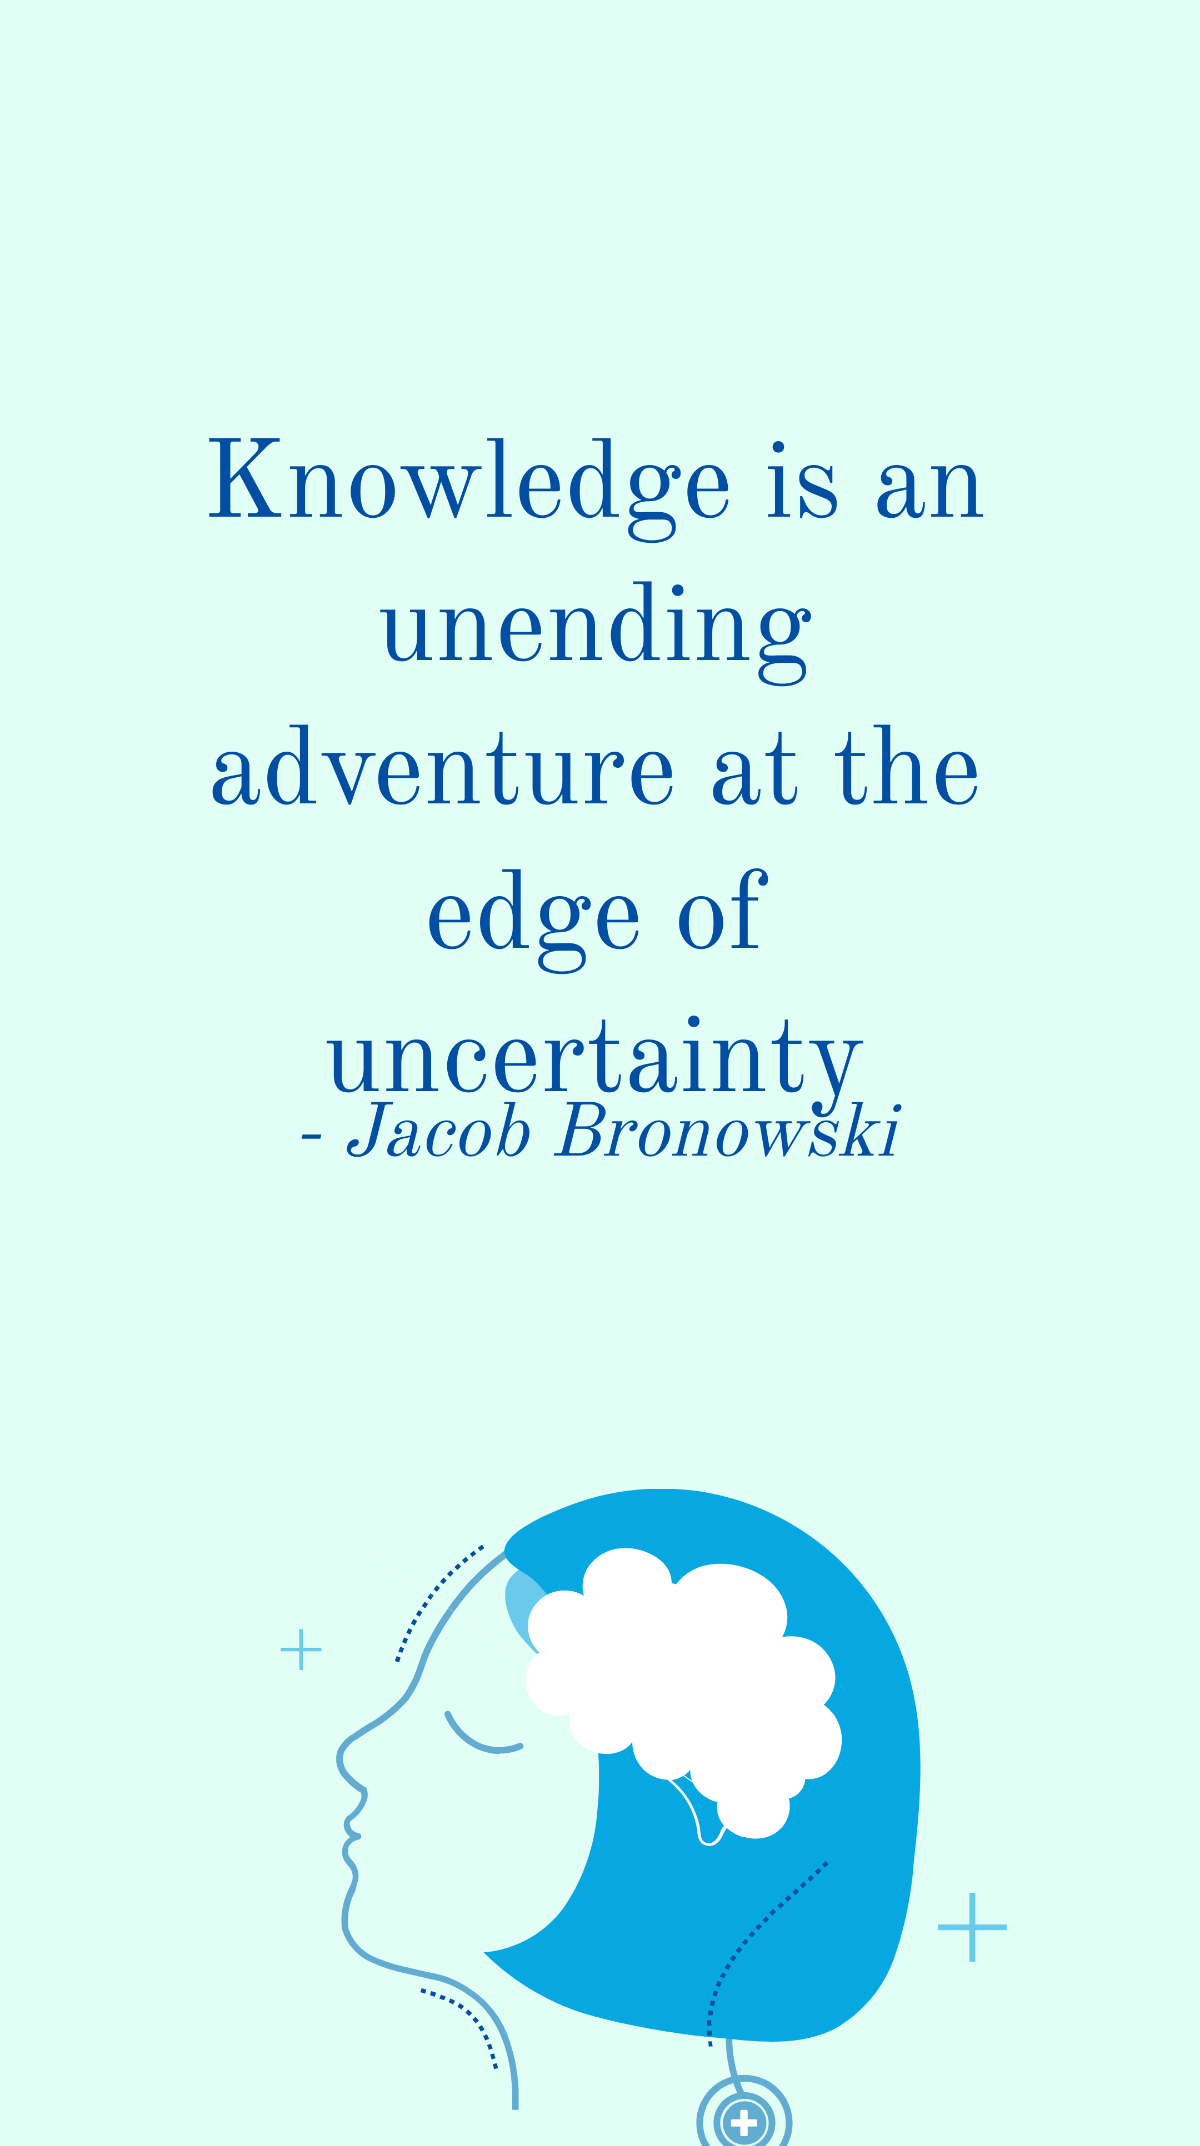 Jacob Bronowski - Knowledge is an unending adventure at the edge of uncertainty